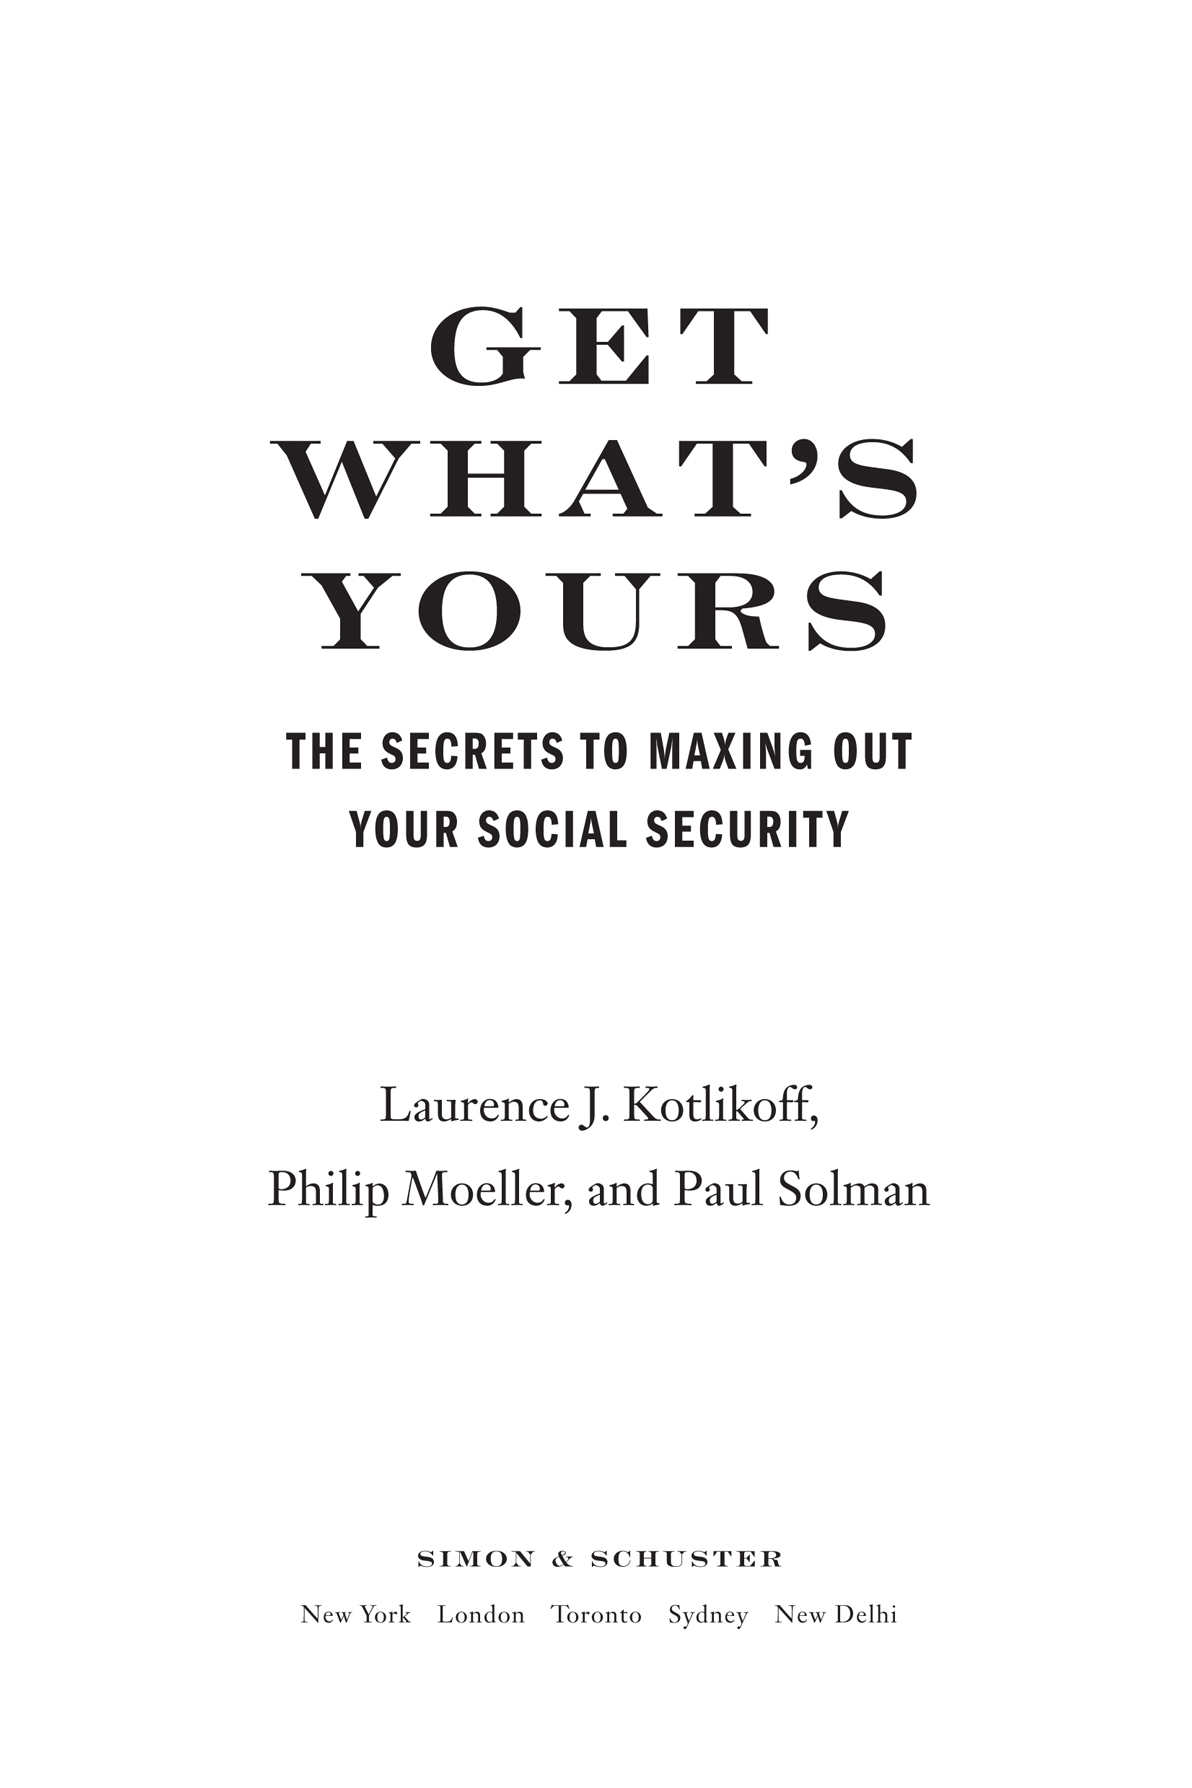 Get Whats Yours The Secrets to Maxing Out Your Social Security - image 1